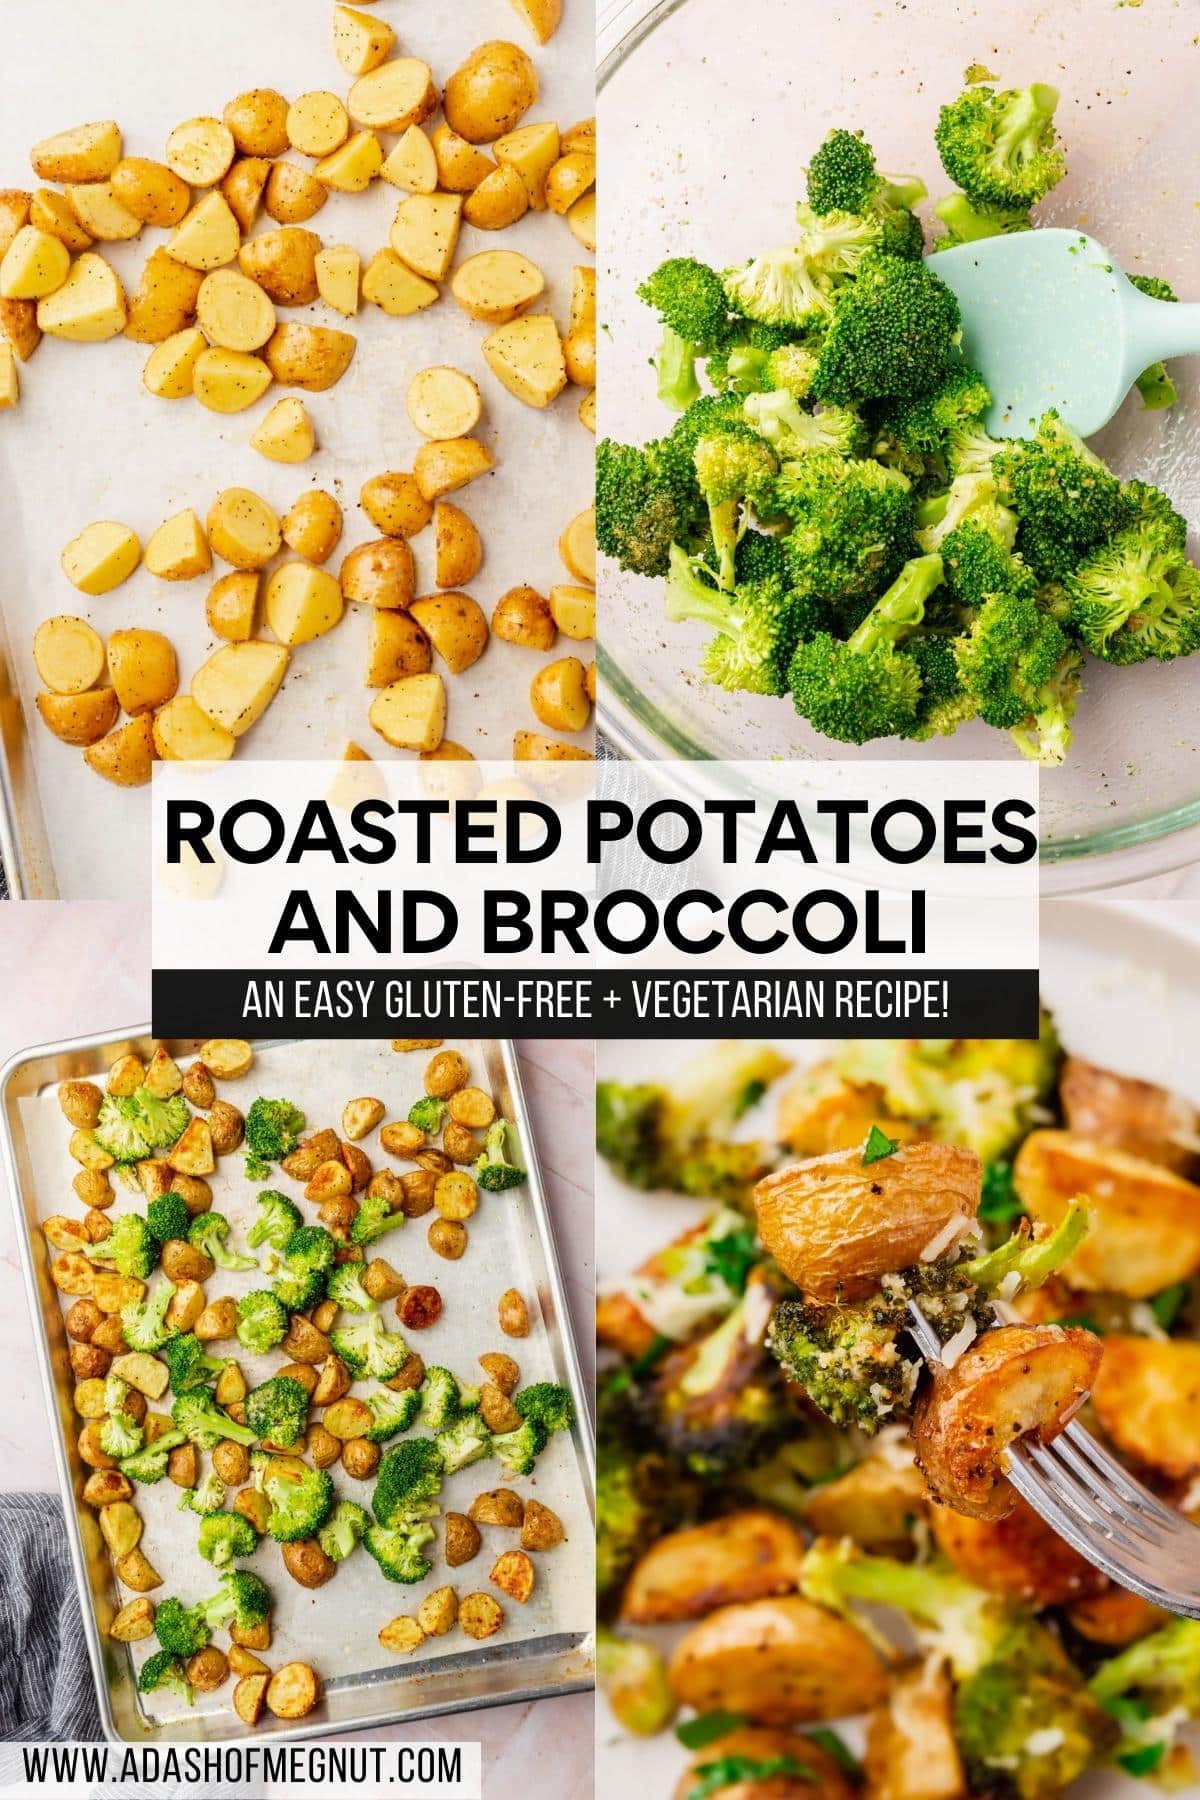 A four photo collage showing the process of making roasted broccoli and potatoes. Photo 1: Baby yukon gold potatoes sliced in half on a sheet pan. Photo 2: Broccoli florets in a glass bowl mixed with oil and spices. Photo 3: Broccoli and baby potatoes on a sheet pan tossed with oil and spices. Photo 4: A fork holding a few pieces of roasted potatoes and broccoli over a bowl of more roasted vegetables.